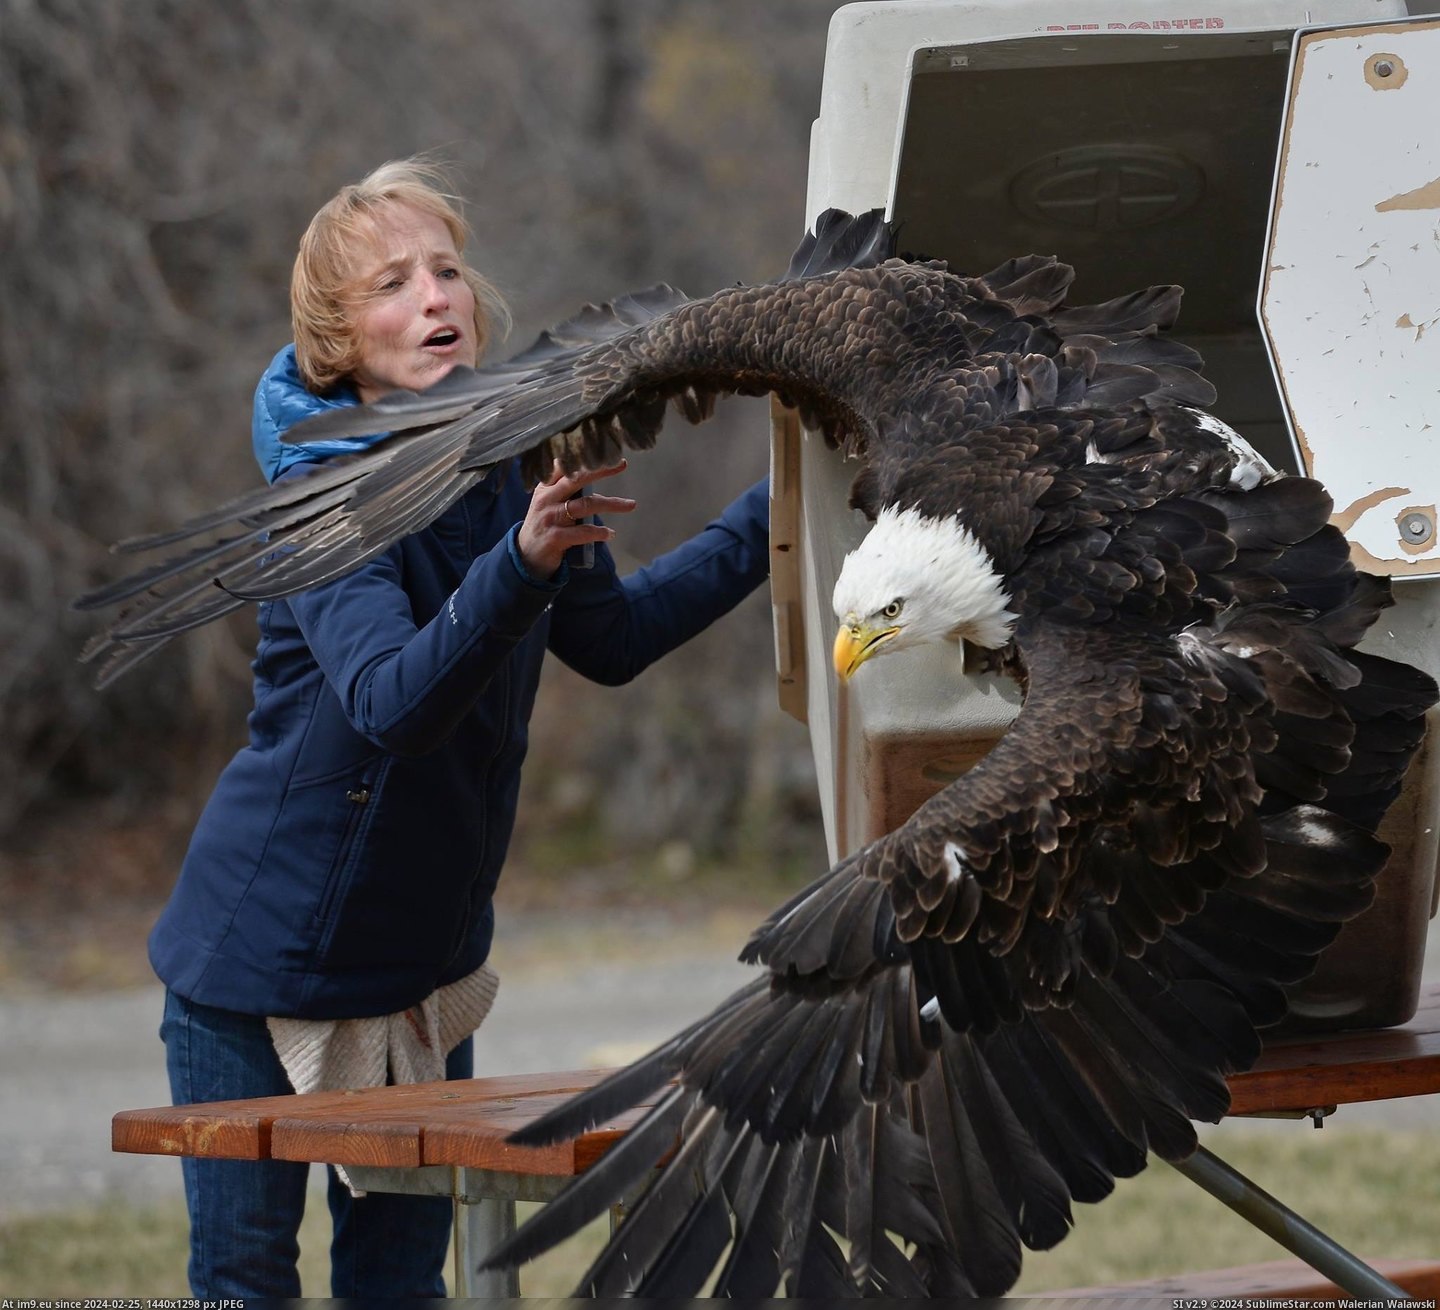 #Trap #Caught #Center #Released #Conservation #Montana #Eagle #Bald [Pics] This bald eagle was found caught in a trap and rehabilitated by the Montana Raptor Conservation Center. It was released b Pic. (Bild von album My r/PICS favs))